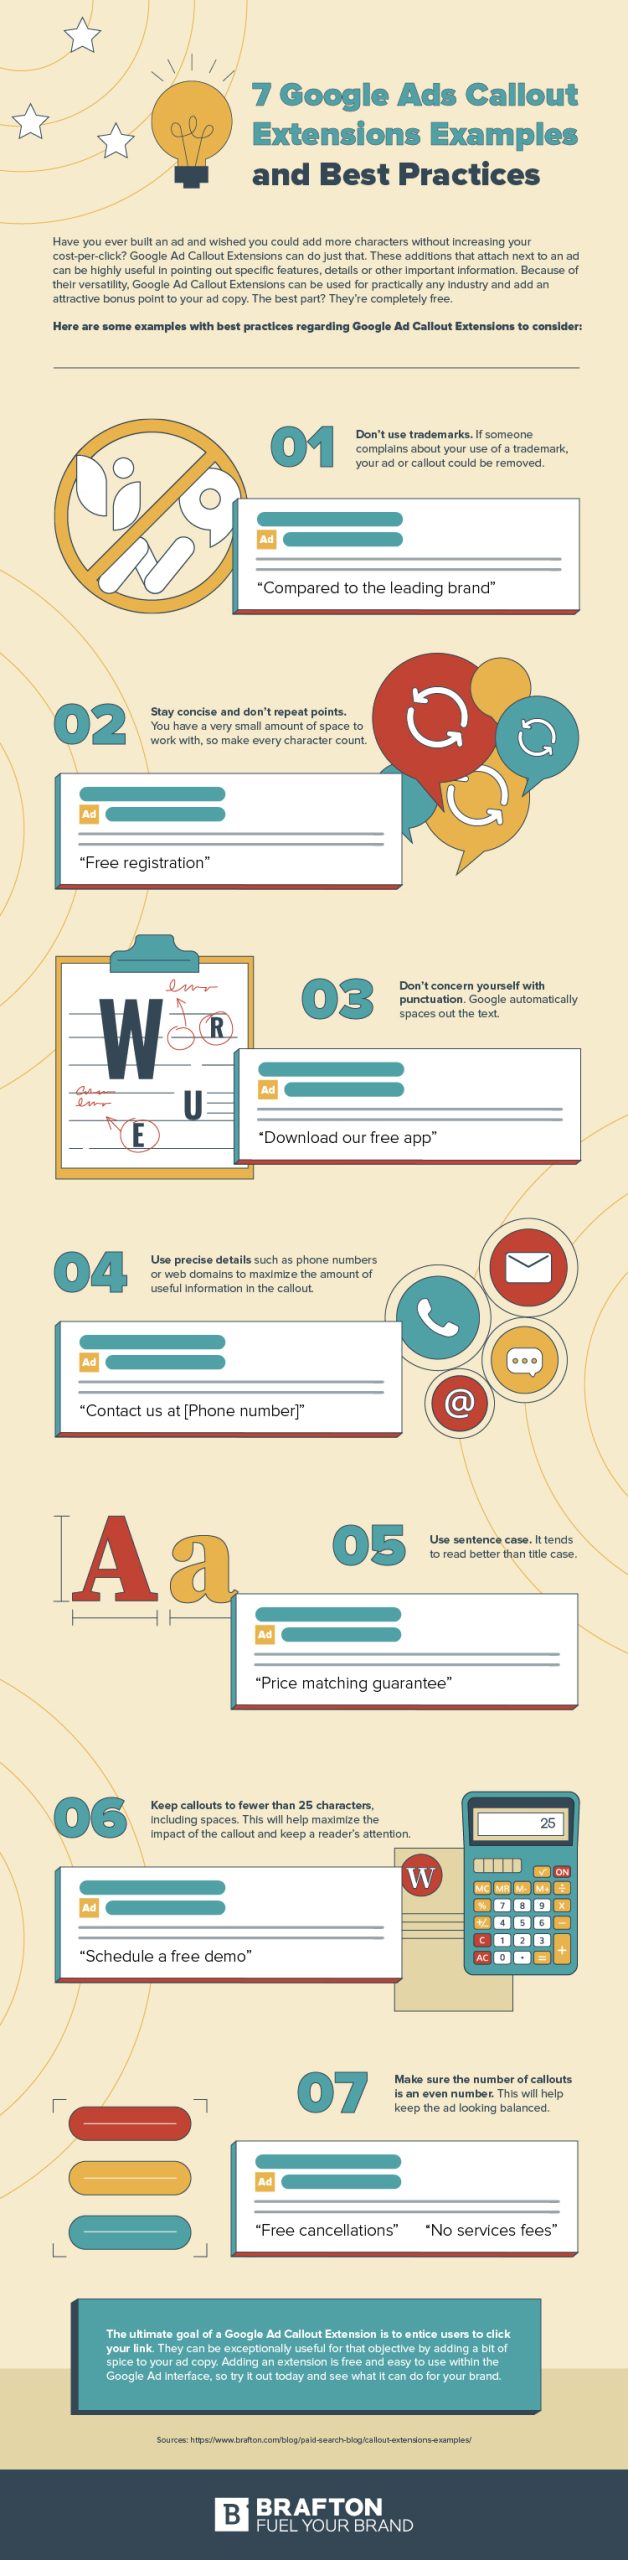 7 Google ads callout extensions examples and best practices infographic